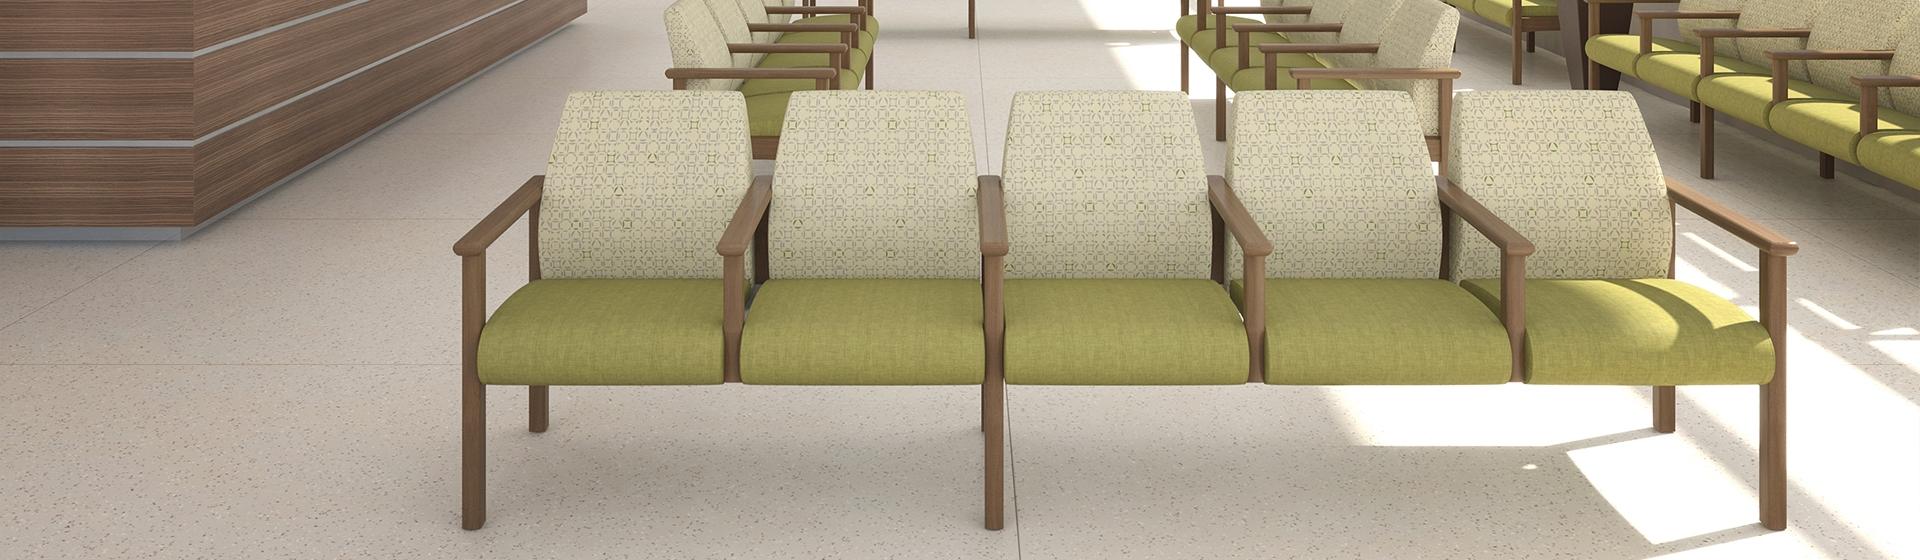 Cooper Bala connected seating in a waiting room